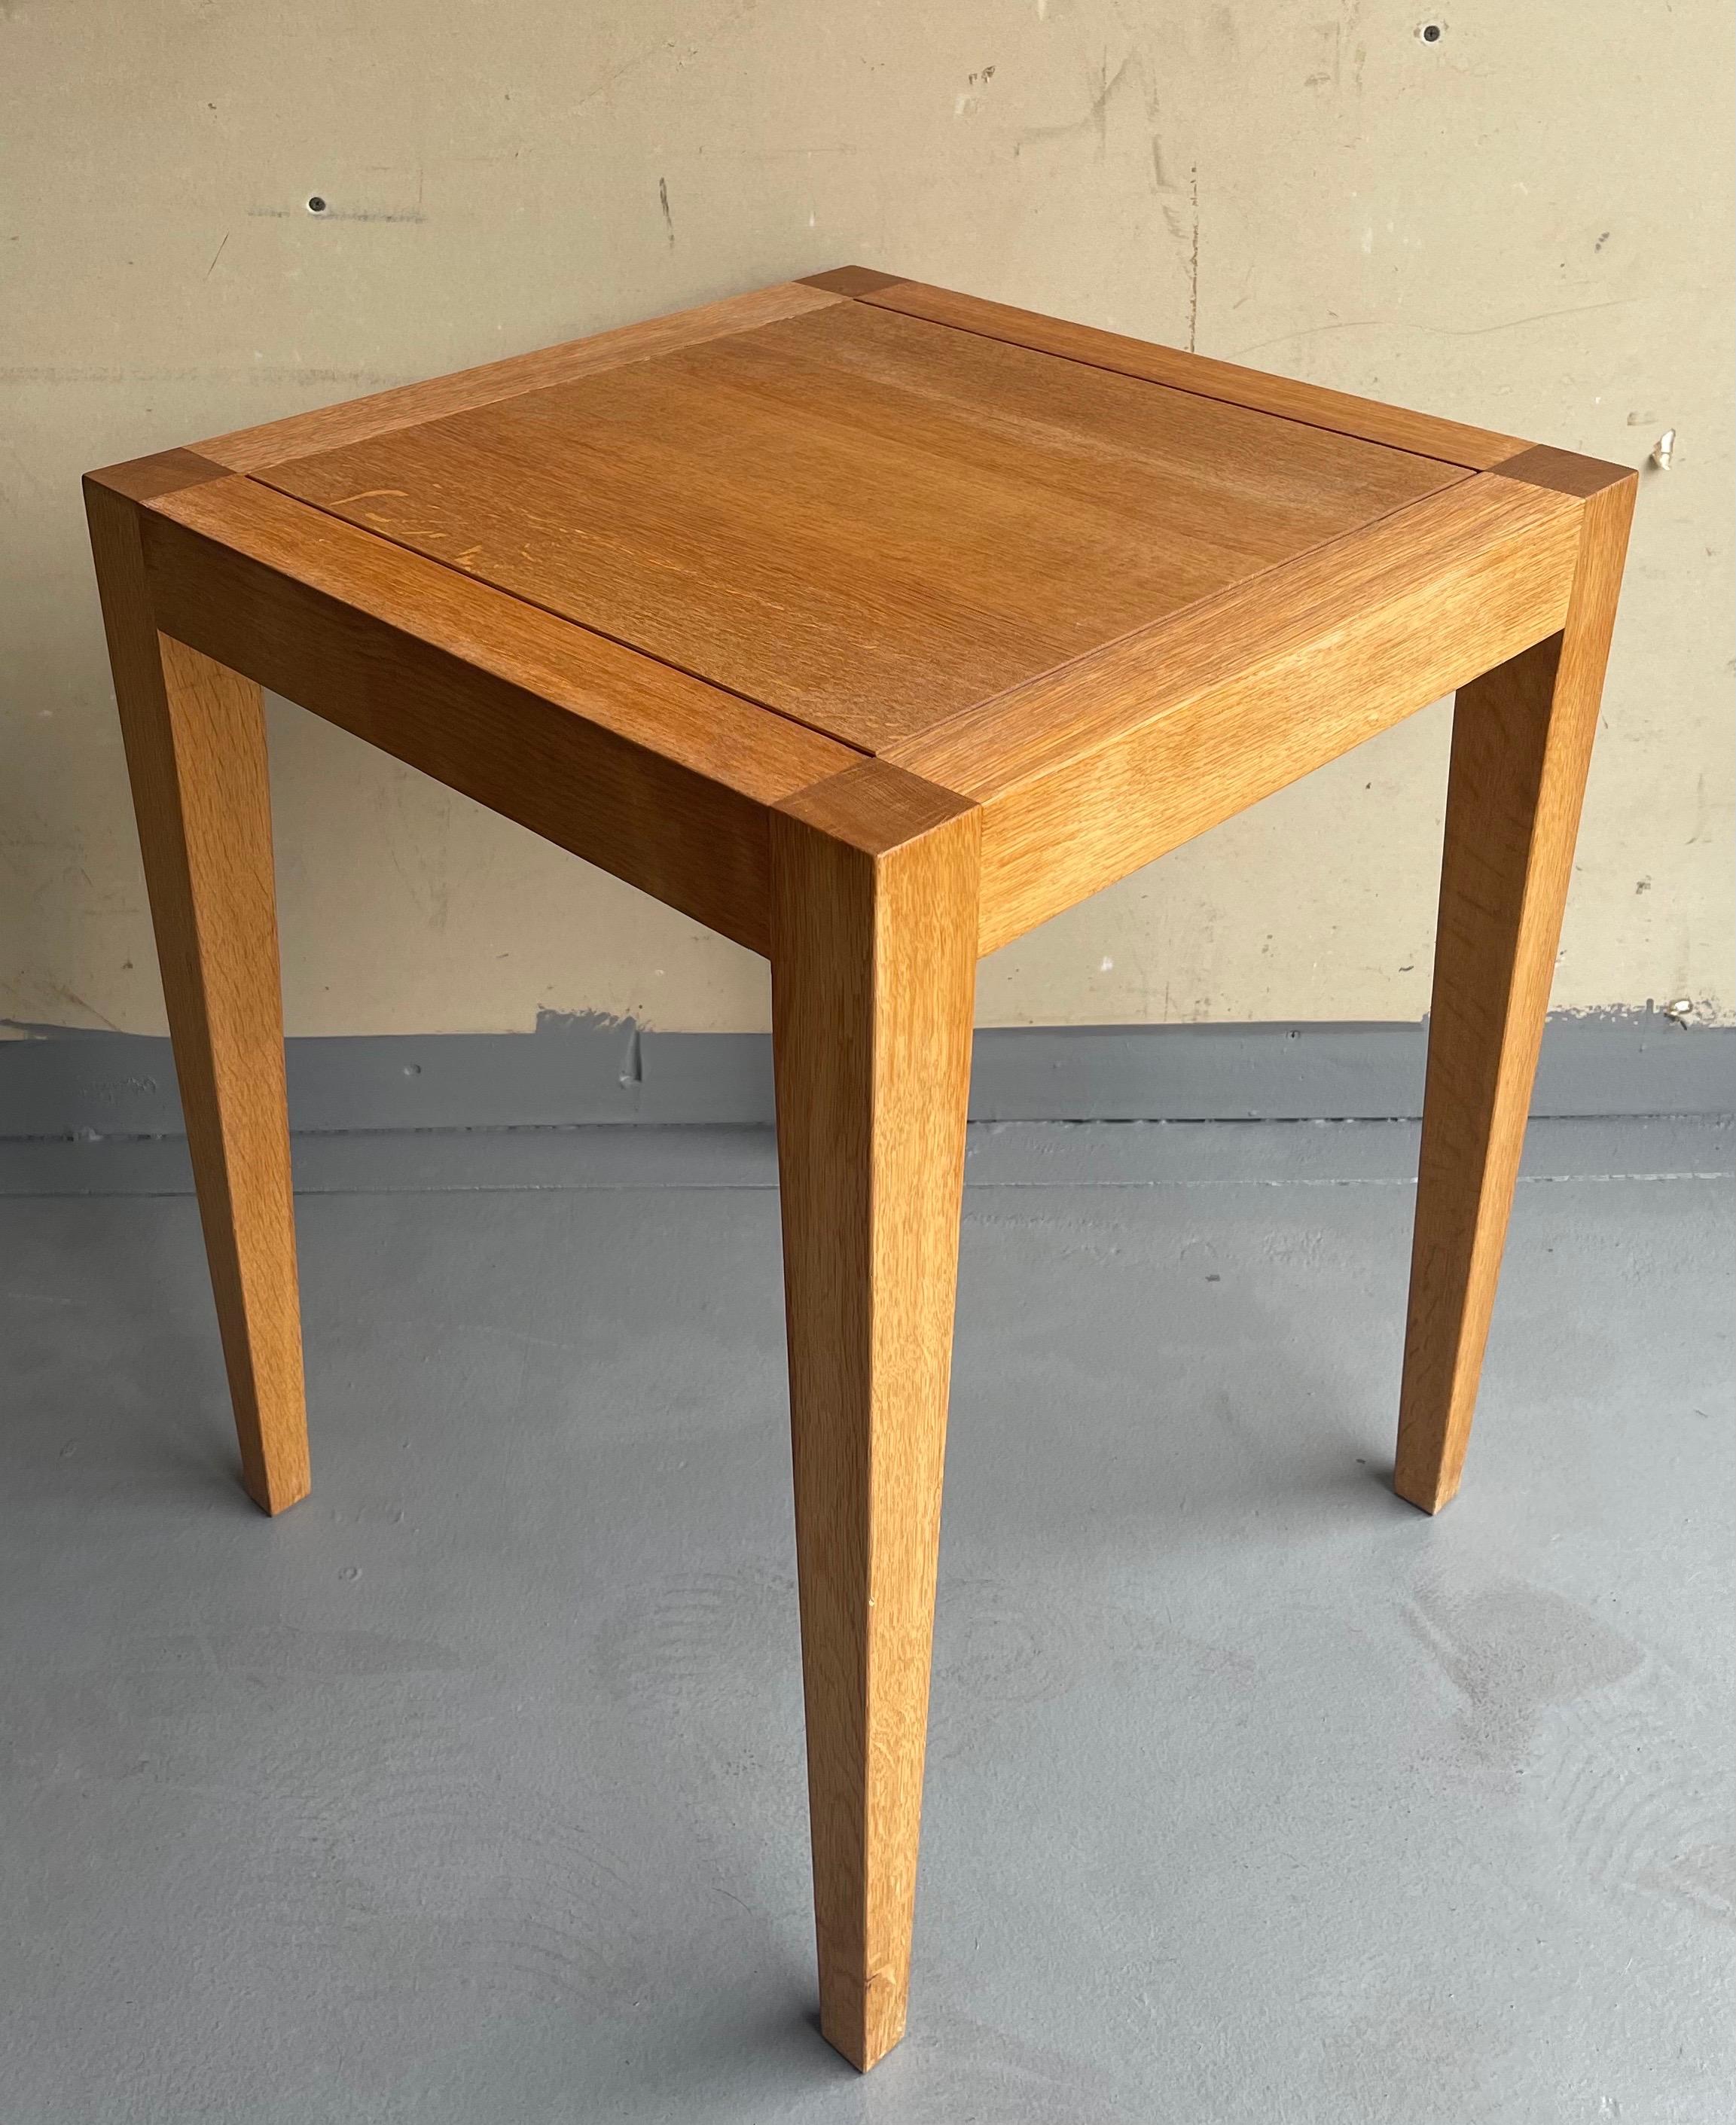 Pair of Organic Modern Square Nesting Tables by Gunther Lambert For Sale 4